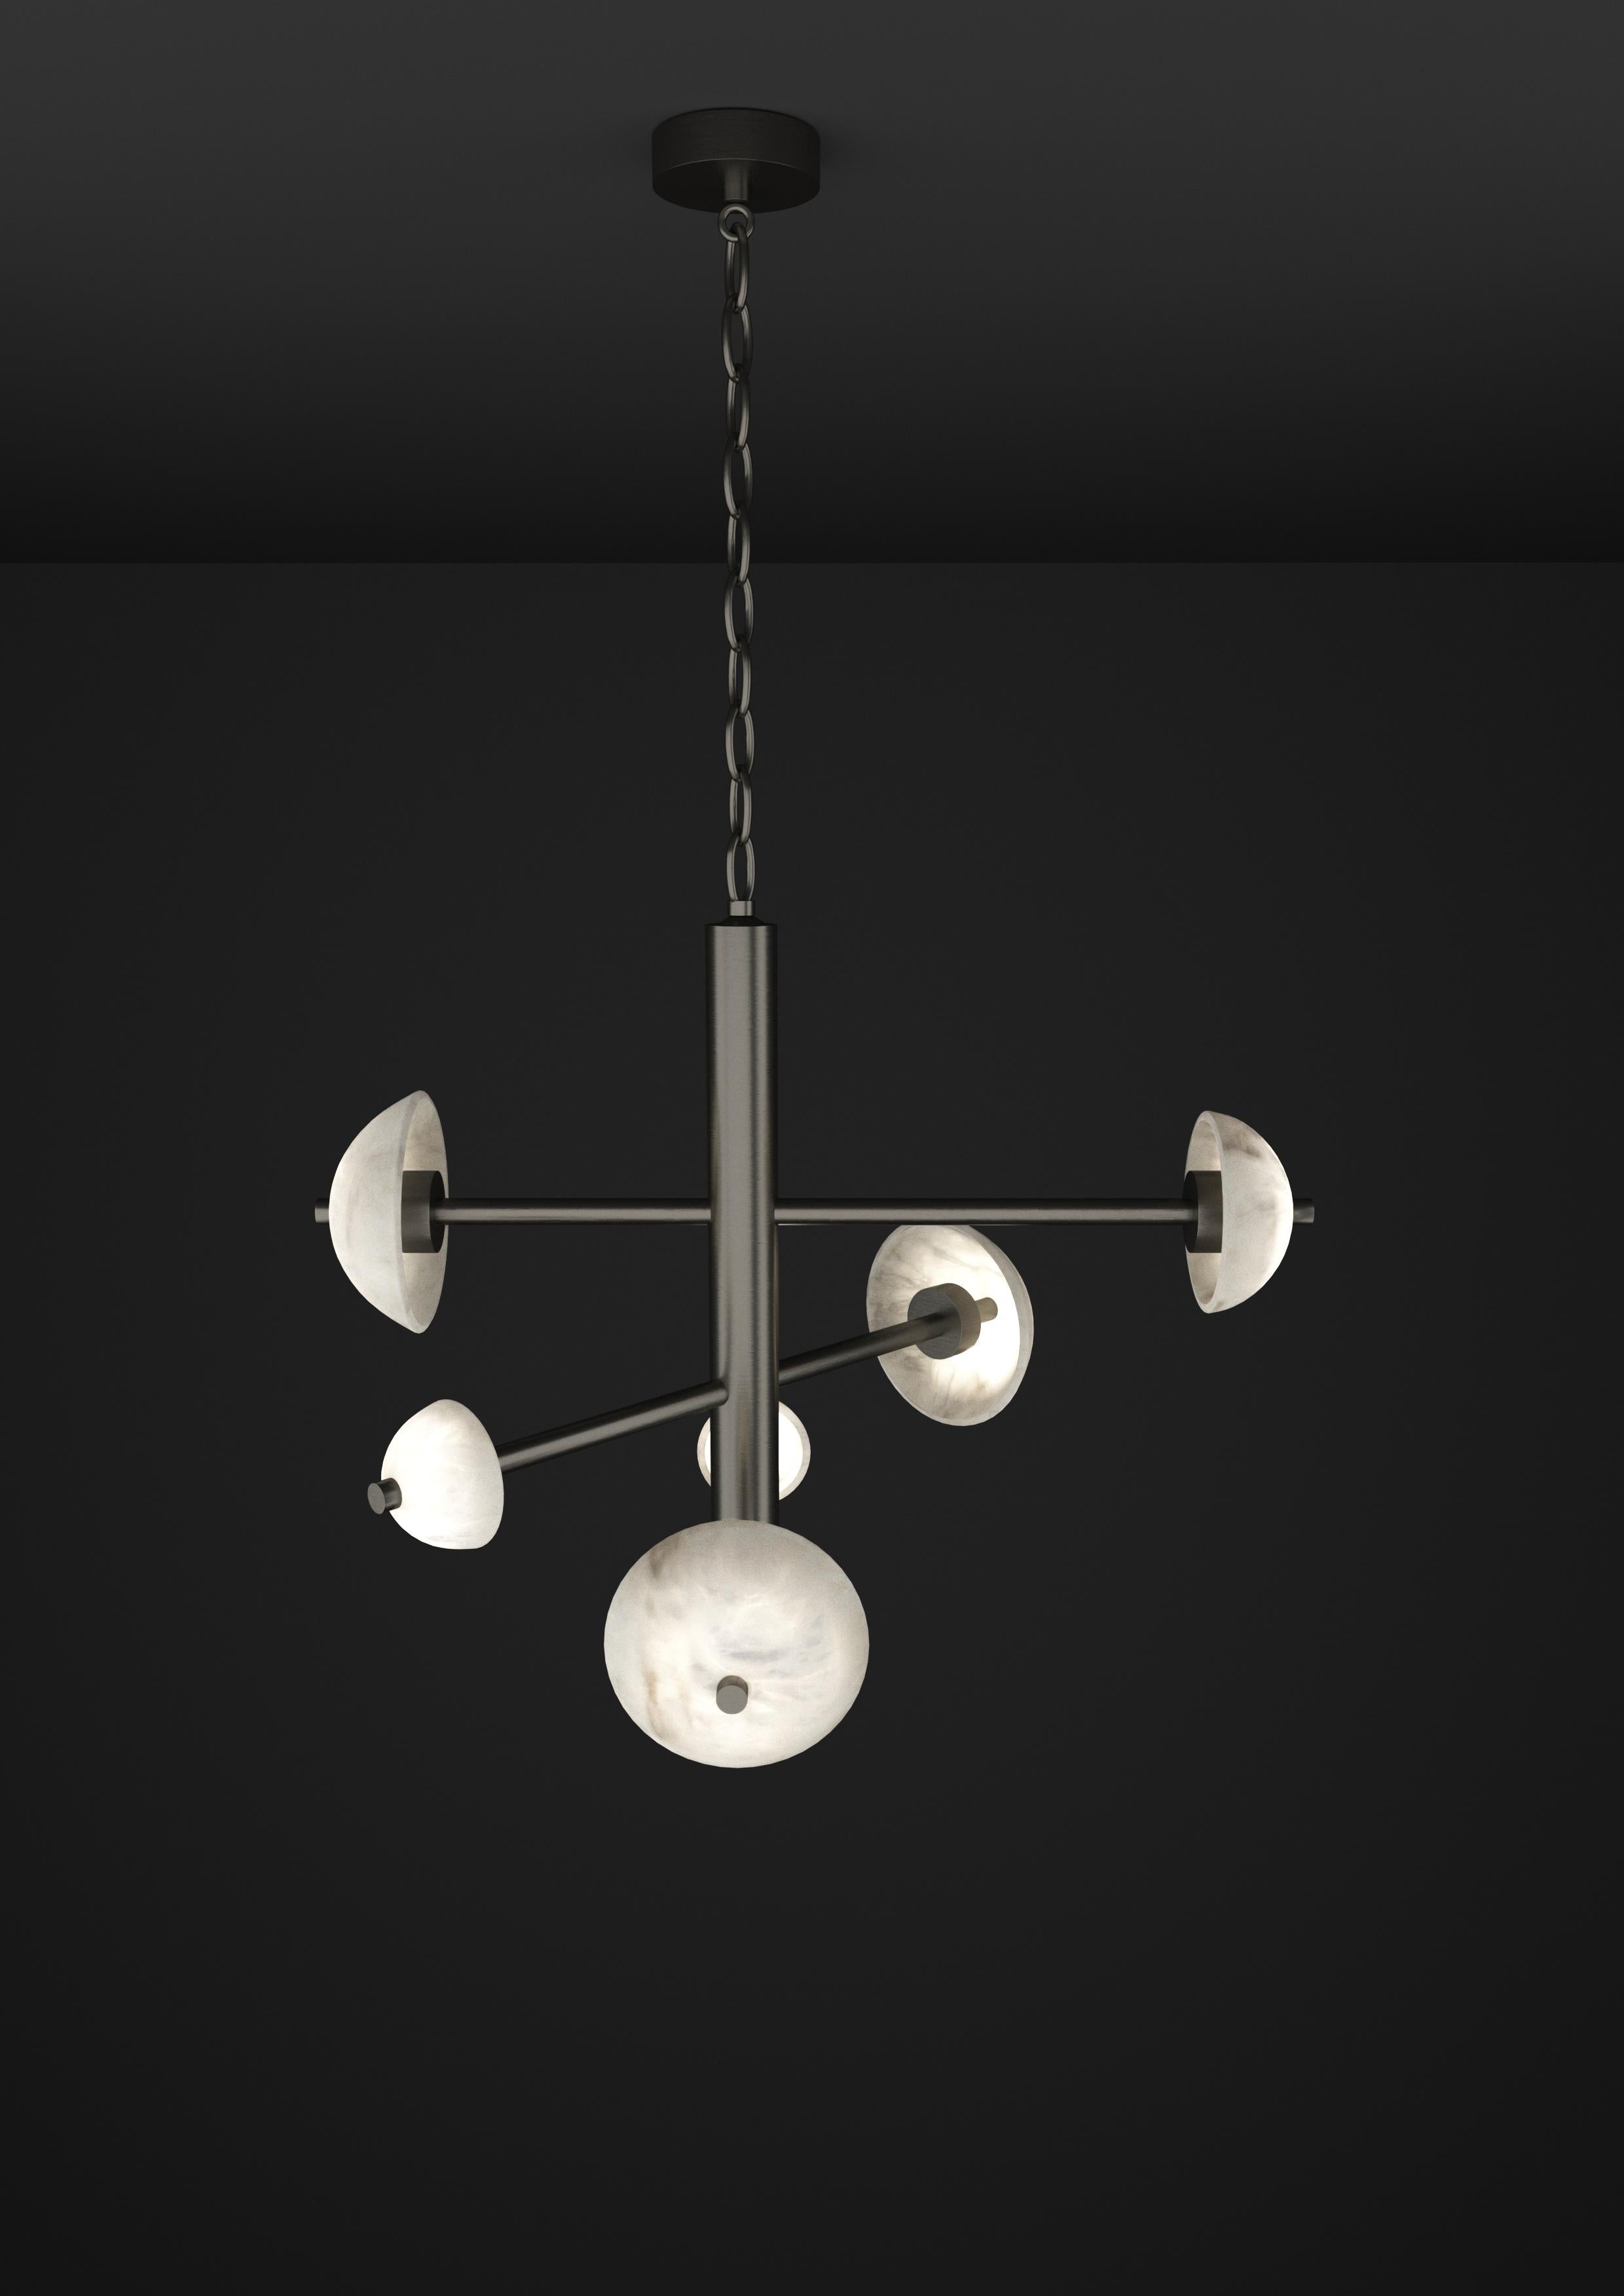 Apollo Brushed Black Metal Pendant Lamp by Alabastro Italiano
Dimensions: D 70,5 x W 54 x H 64 cm.
Materials: White alabaster and metal.

Available in different finishes: Shiny Silver, Bronze, Brushed Brass, Ruggine of Florence, Brushed Burnished,